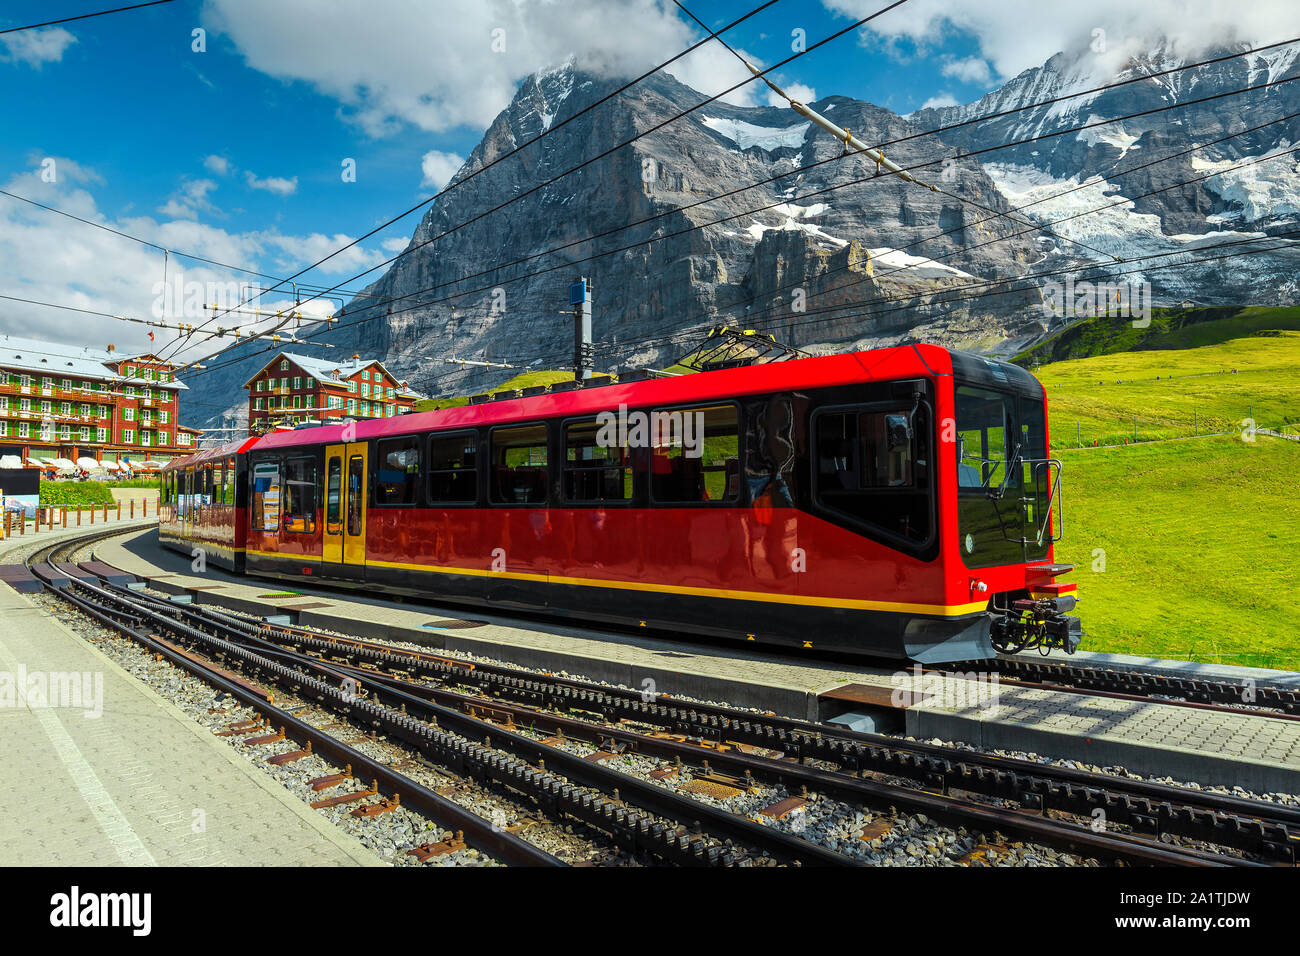 Famous Swiss excursion destination. Spectacular travel and touristic place with high mountains and stunning view. Modern electric red tourist train in Stock Photo